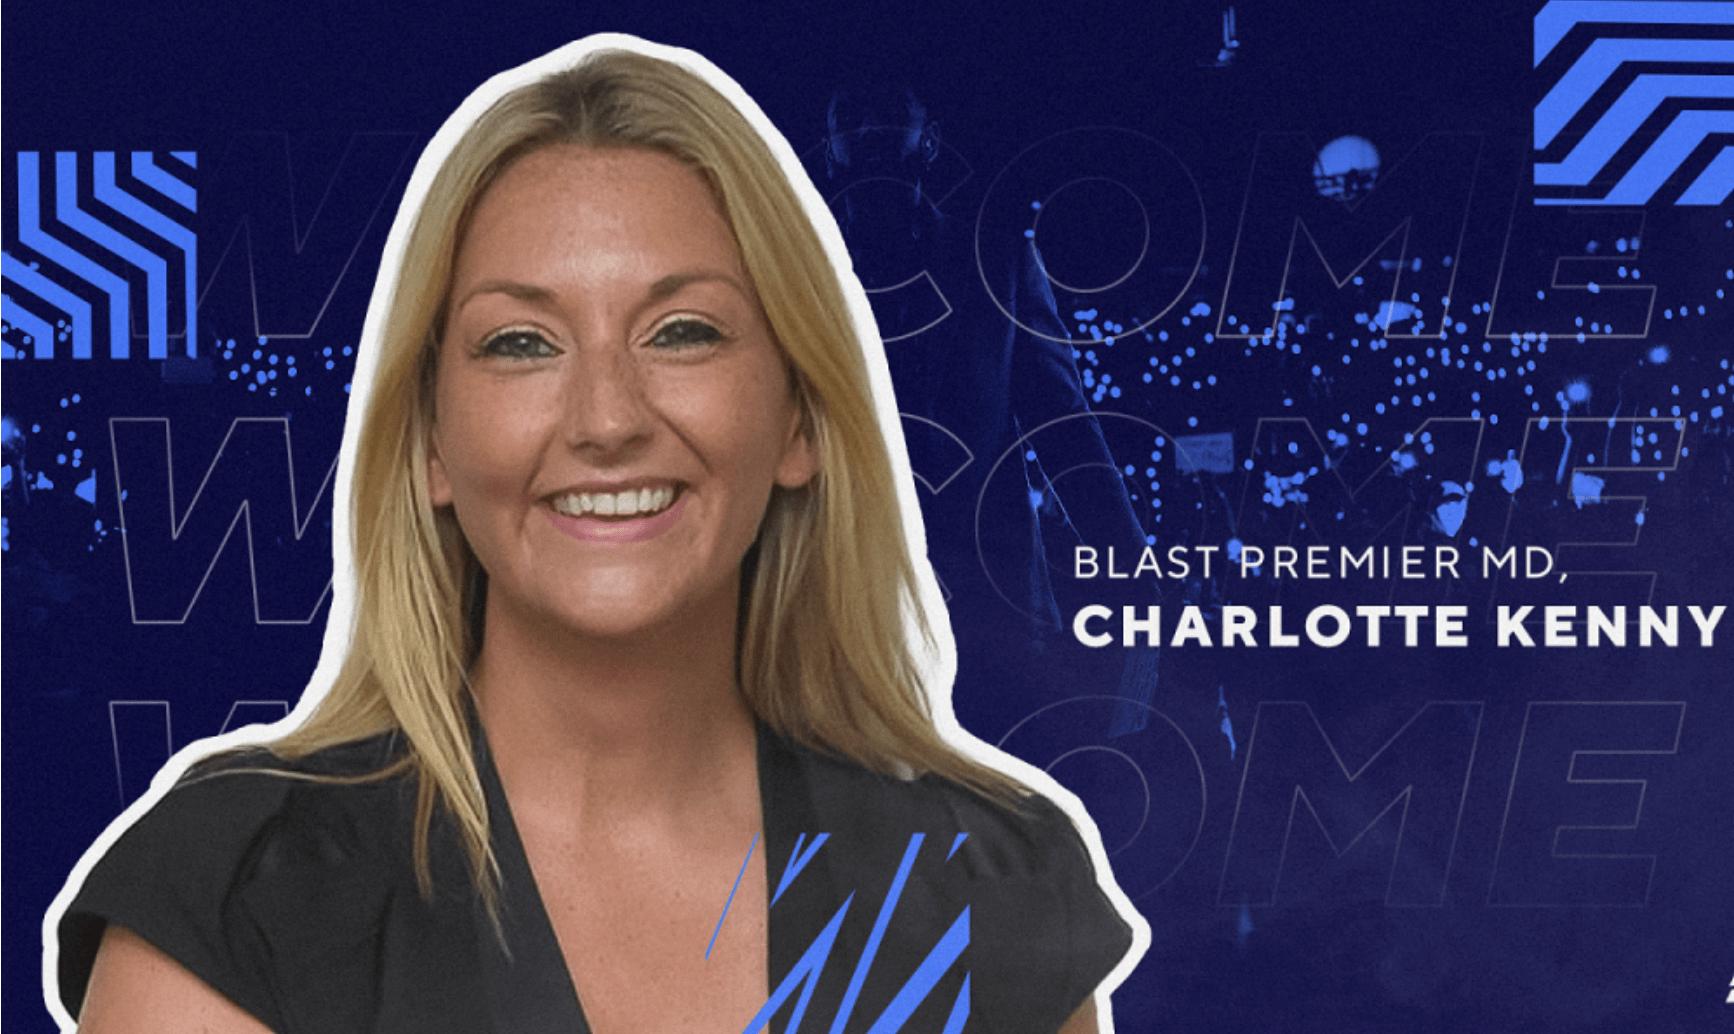 Charlotte Kenny appointed as BLAST Premier Managing Director ...